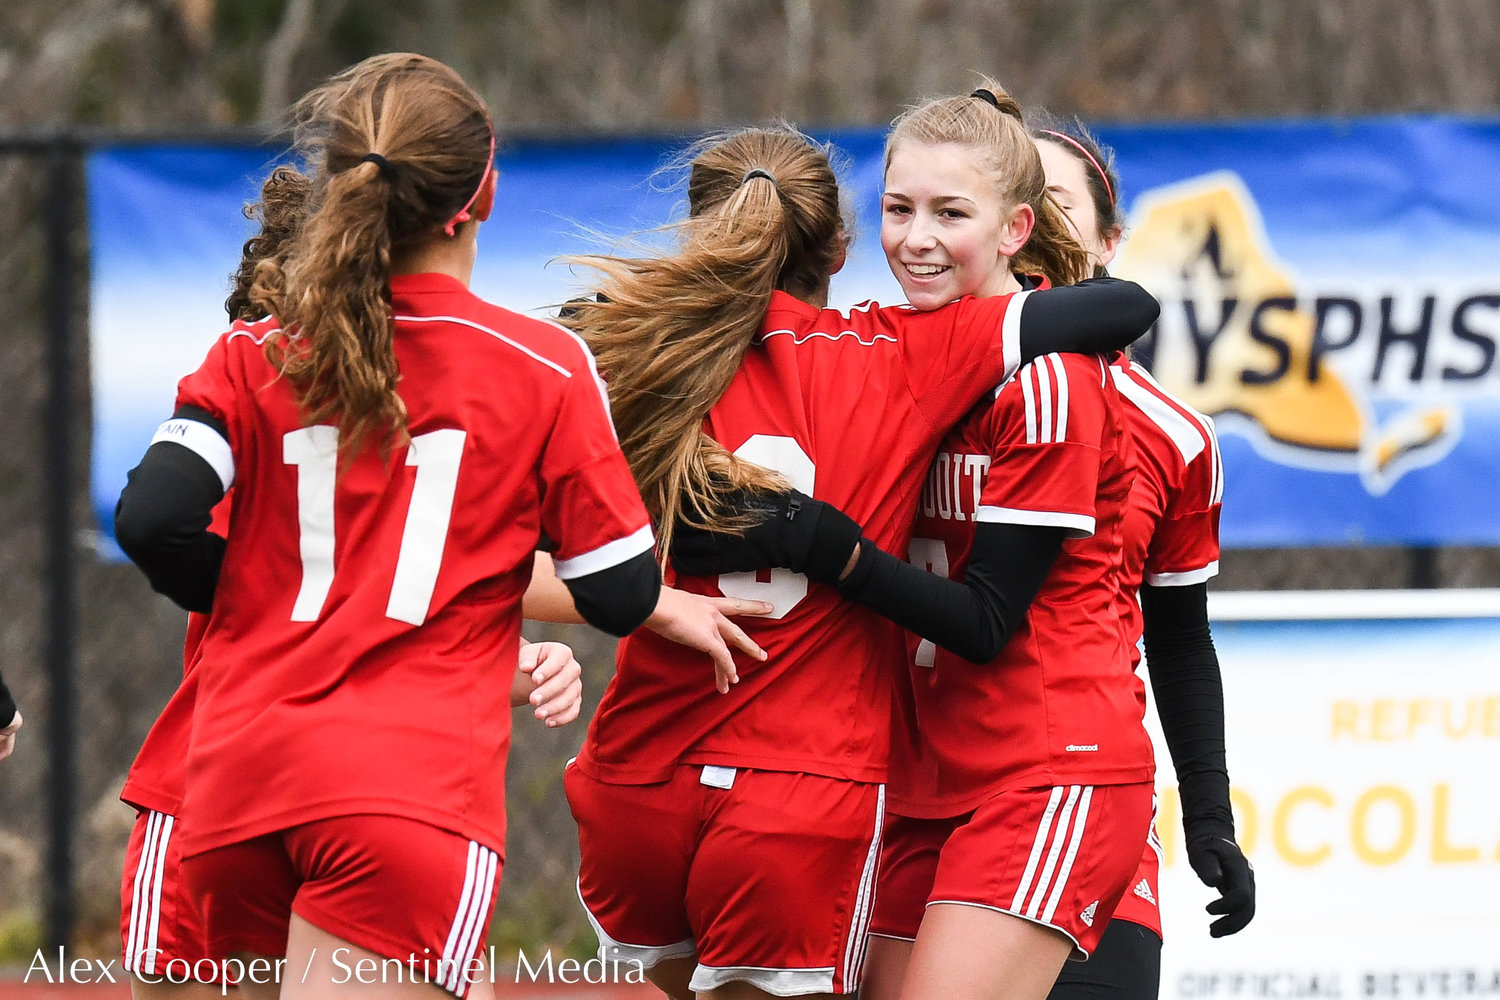 Sauquoit Valley players celebrate after scoring a goal during the Class C state final against Waterford-Halfmoon on Sunday at Cortland High School. The Indians lost 6-3.